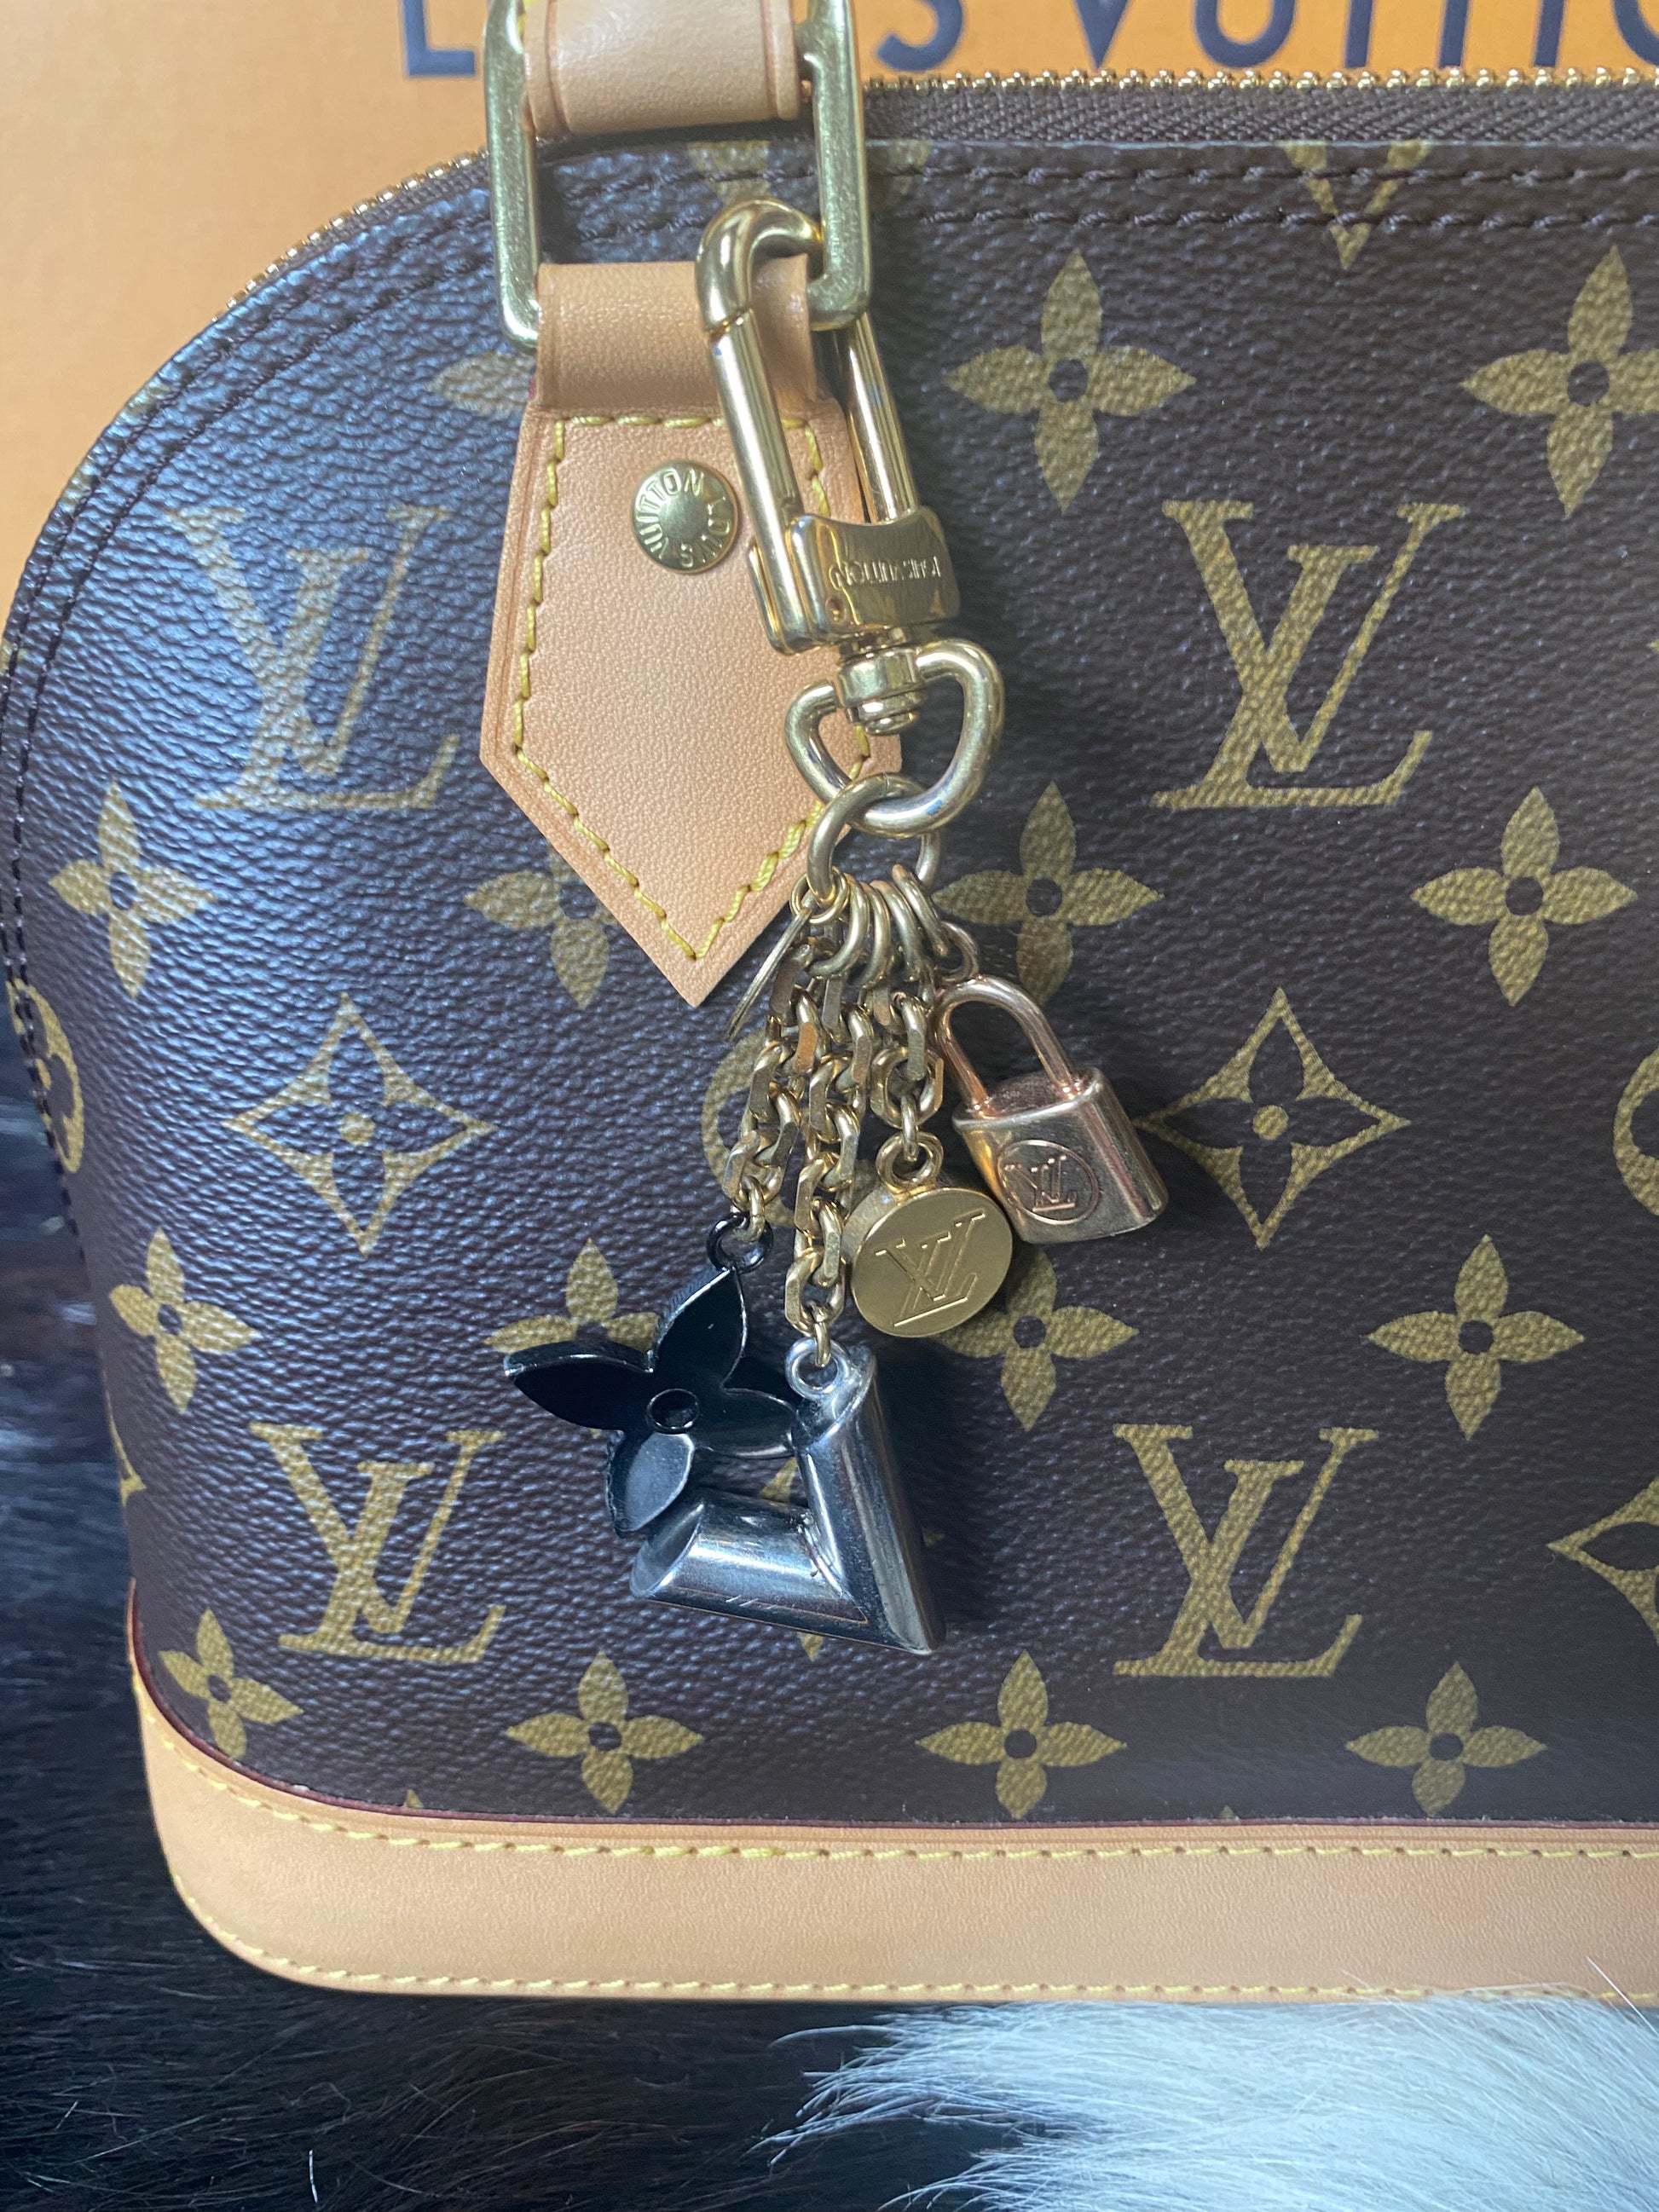 Preloved Louis Vuitton Charm Key Ring Gold/Silver Metal 081023 $30 OFF –  KimmieBBags LLC